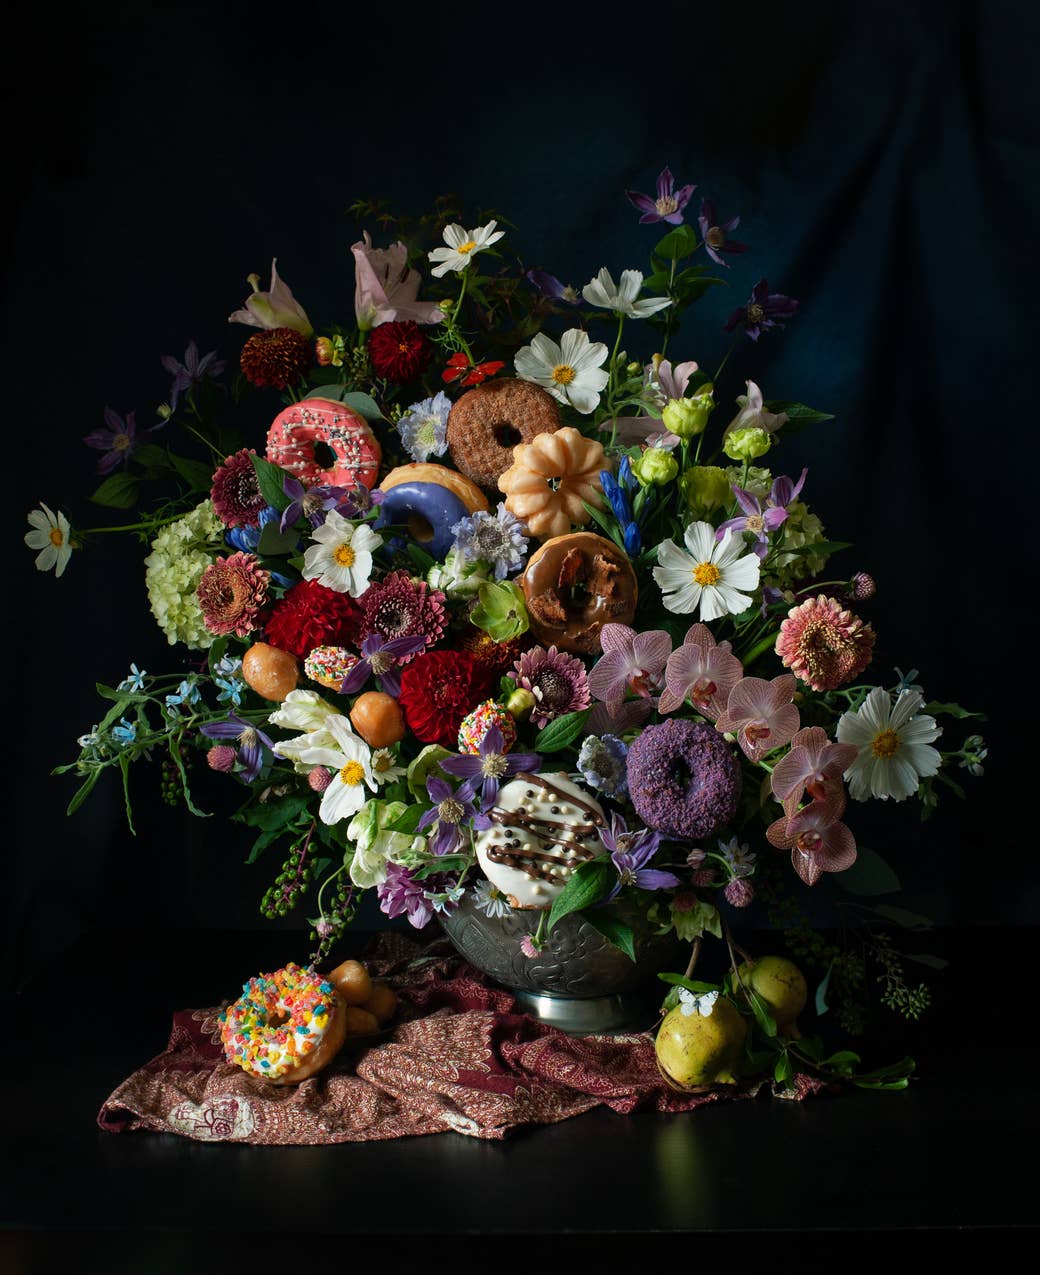 A large bouquet showing some flowers and an assortment of donuts